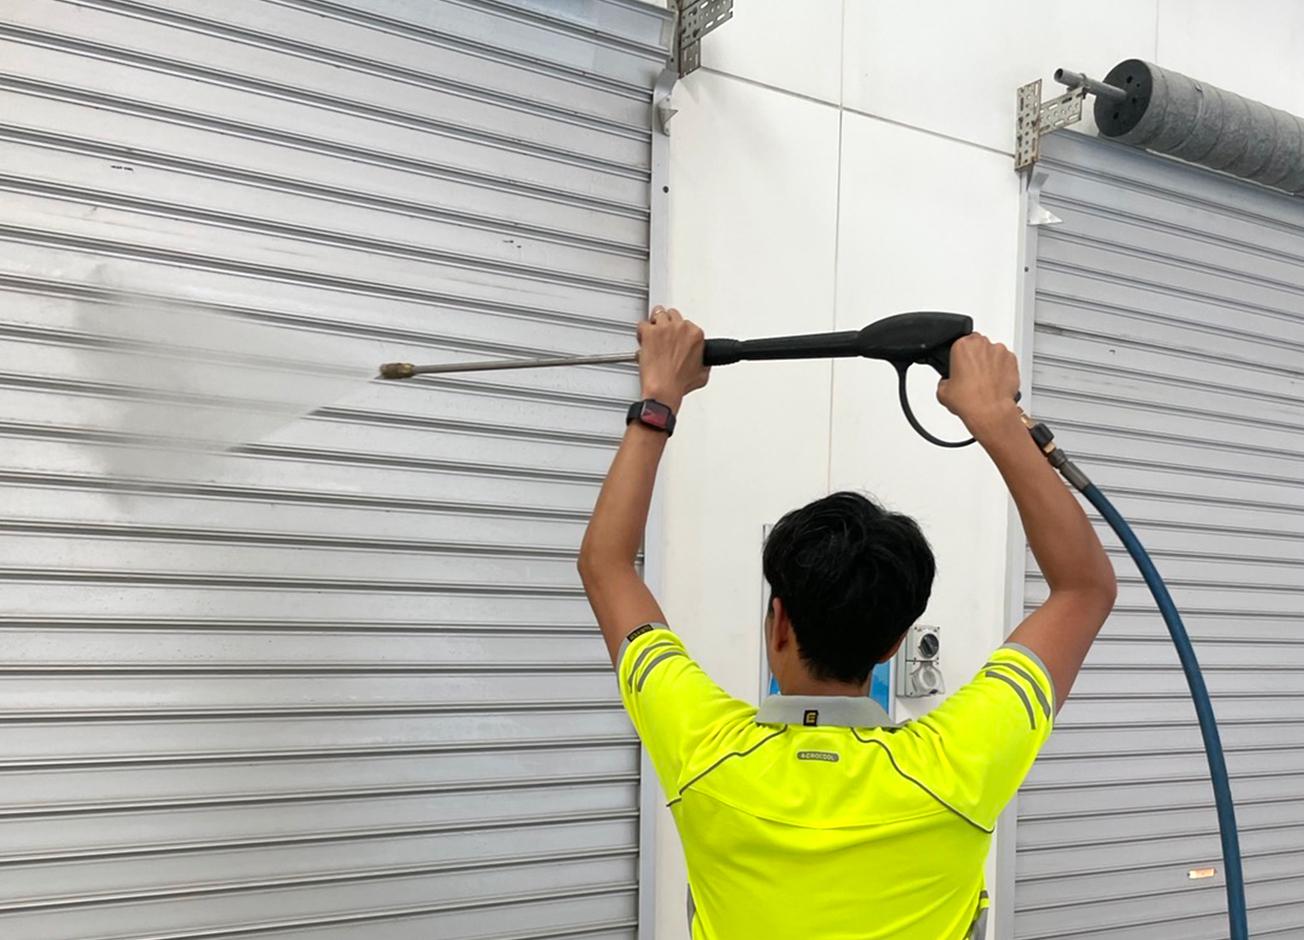 QCS Staff Cleaning Garage Door | Featured Image for the Commercial Pressure Cleaning Page of QCS Cleaning.